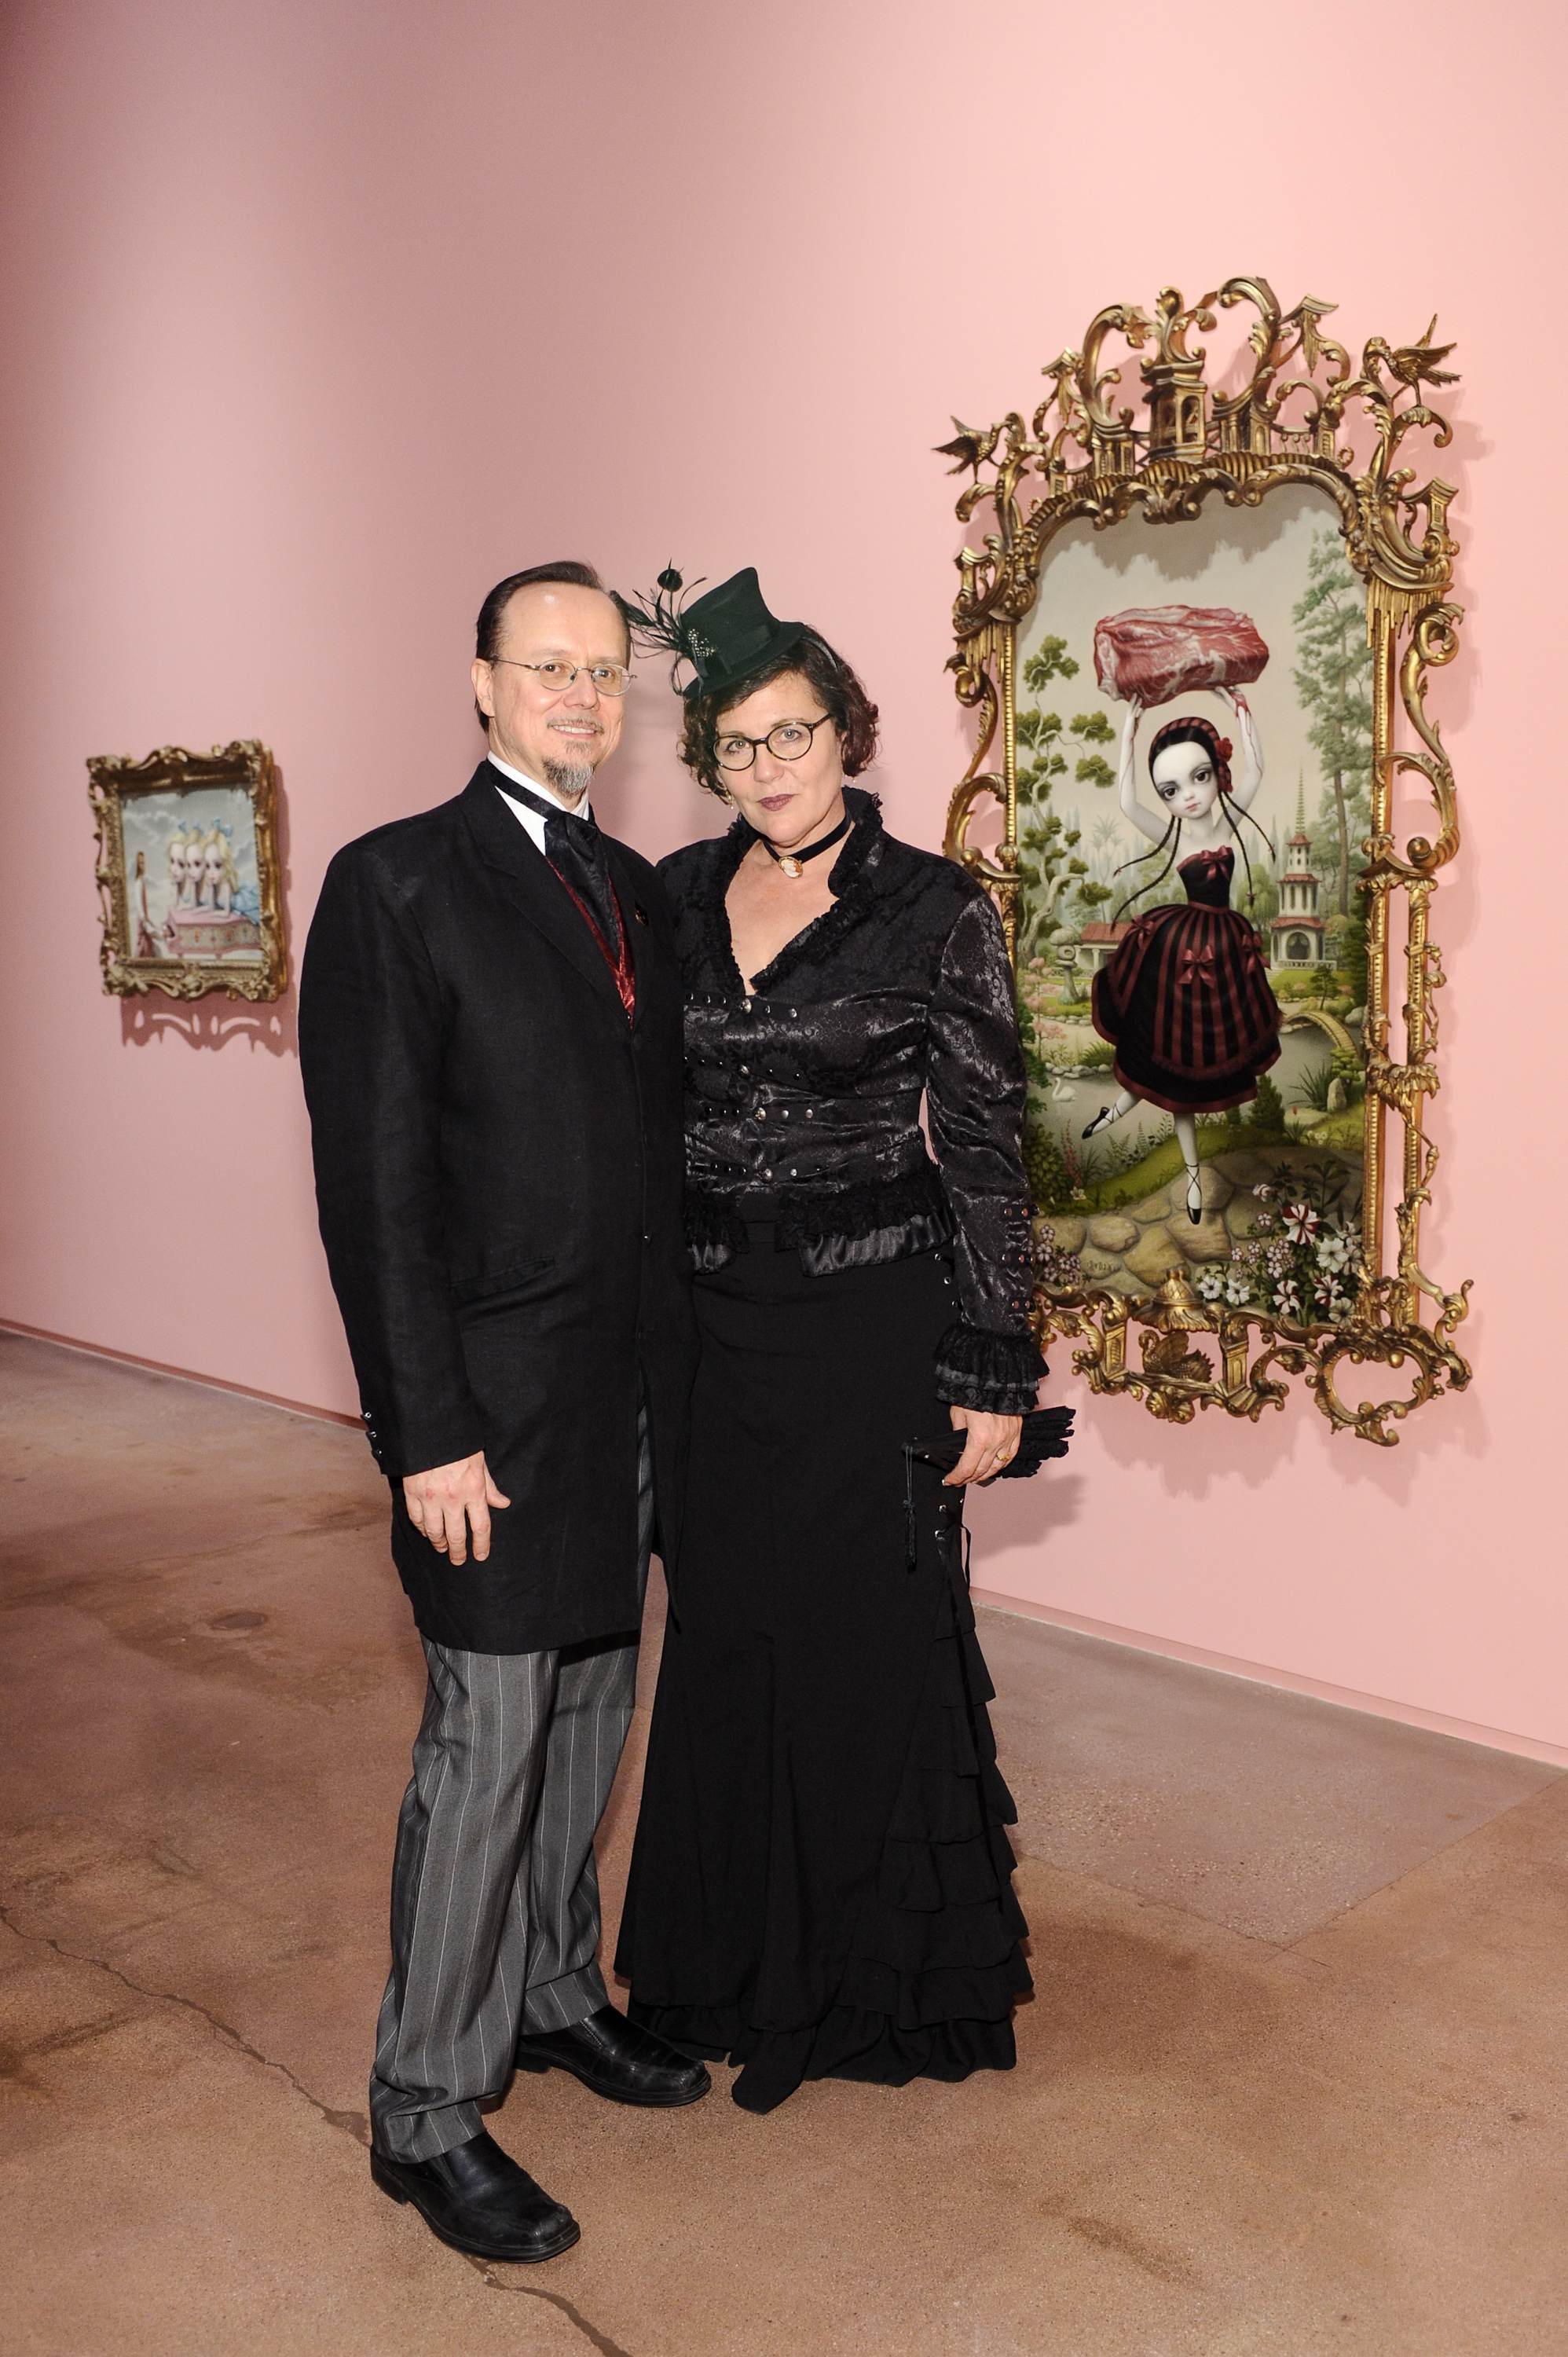 Guess Who Showed Up at Mark Ryden's Latest Art Show? | HuffPost